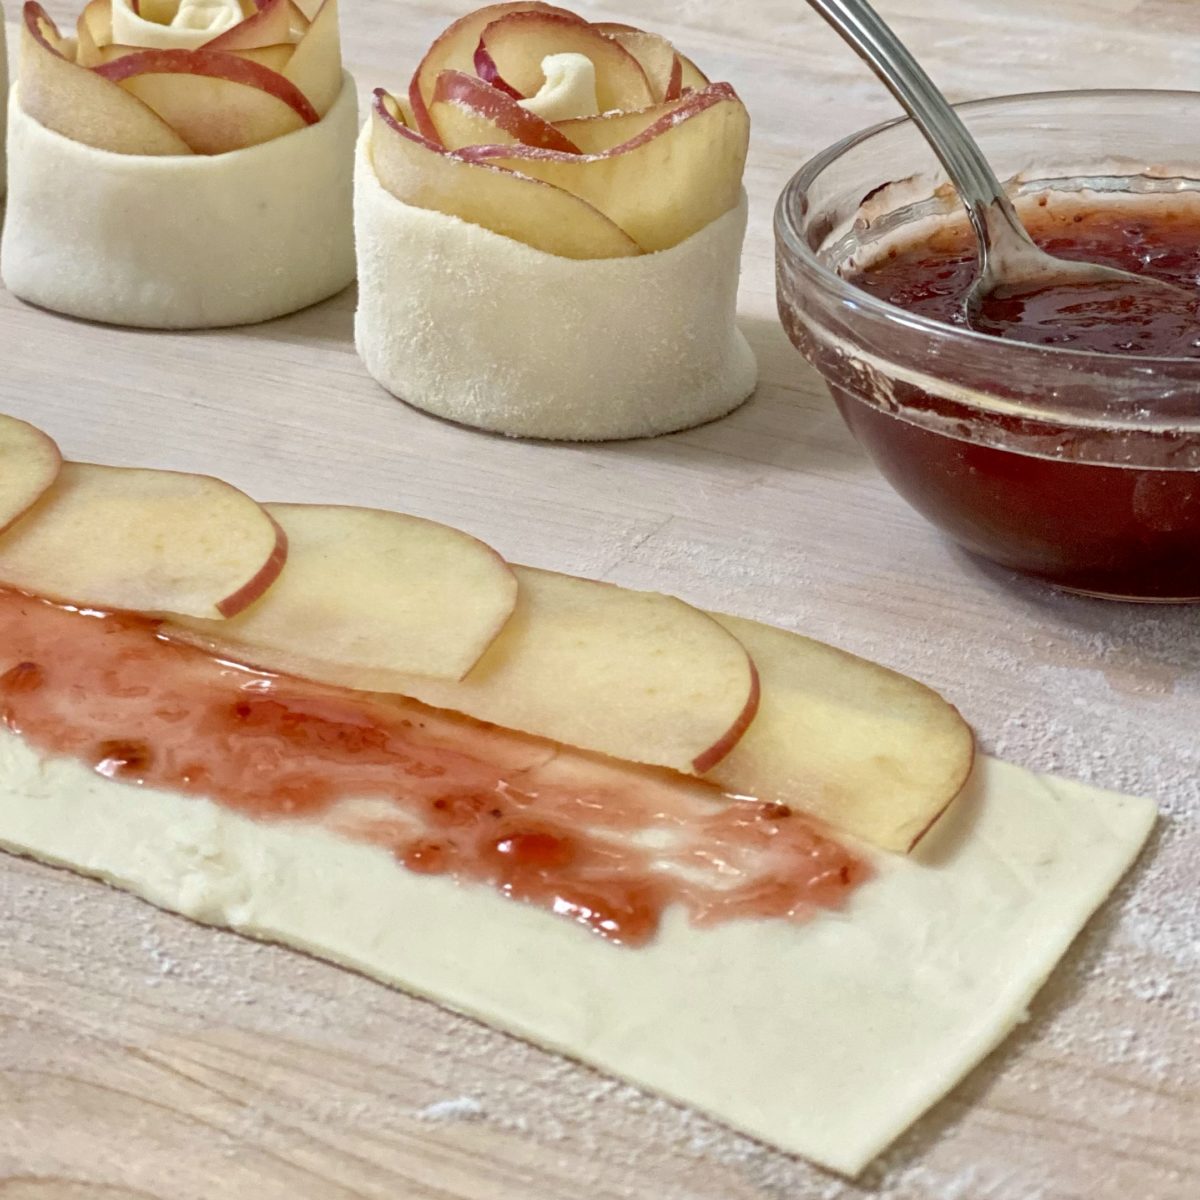 Puff pastry with strawberry preserves on it and apples layered at the top half.